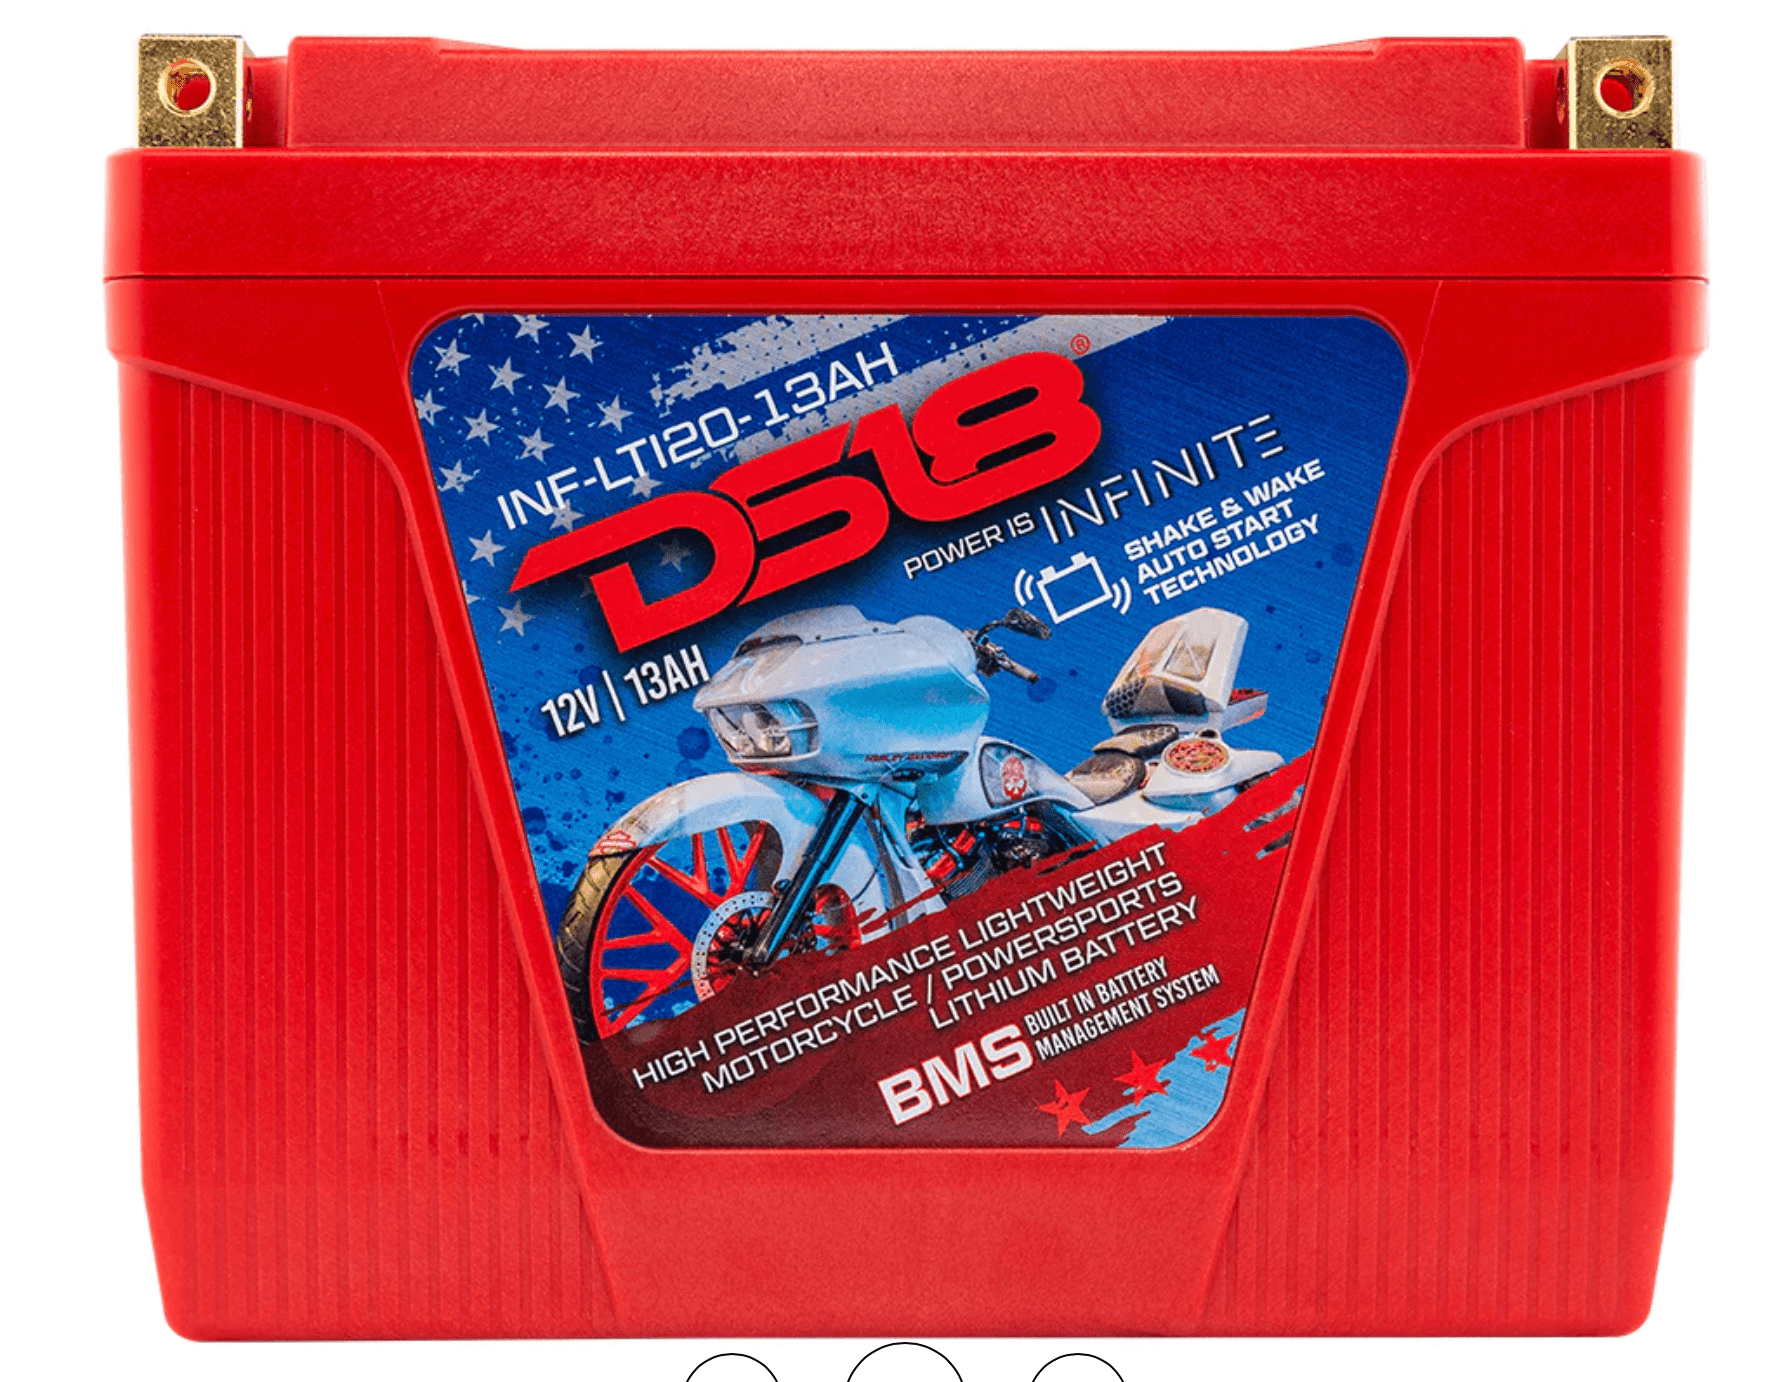 DS18 INF-LTI20-13AH Lithium Battery - Backyard Air Suspension & Innovations, LLC.